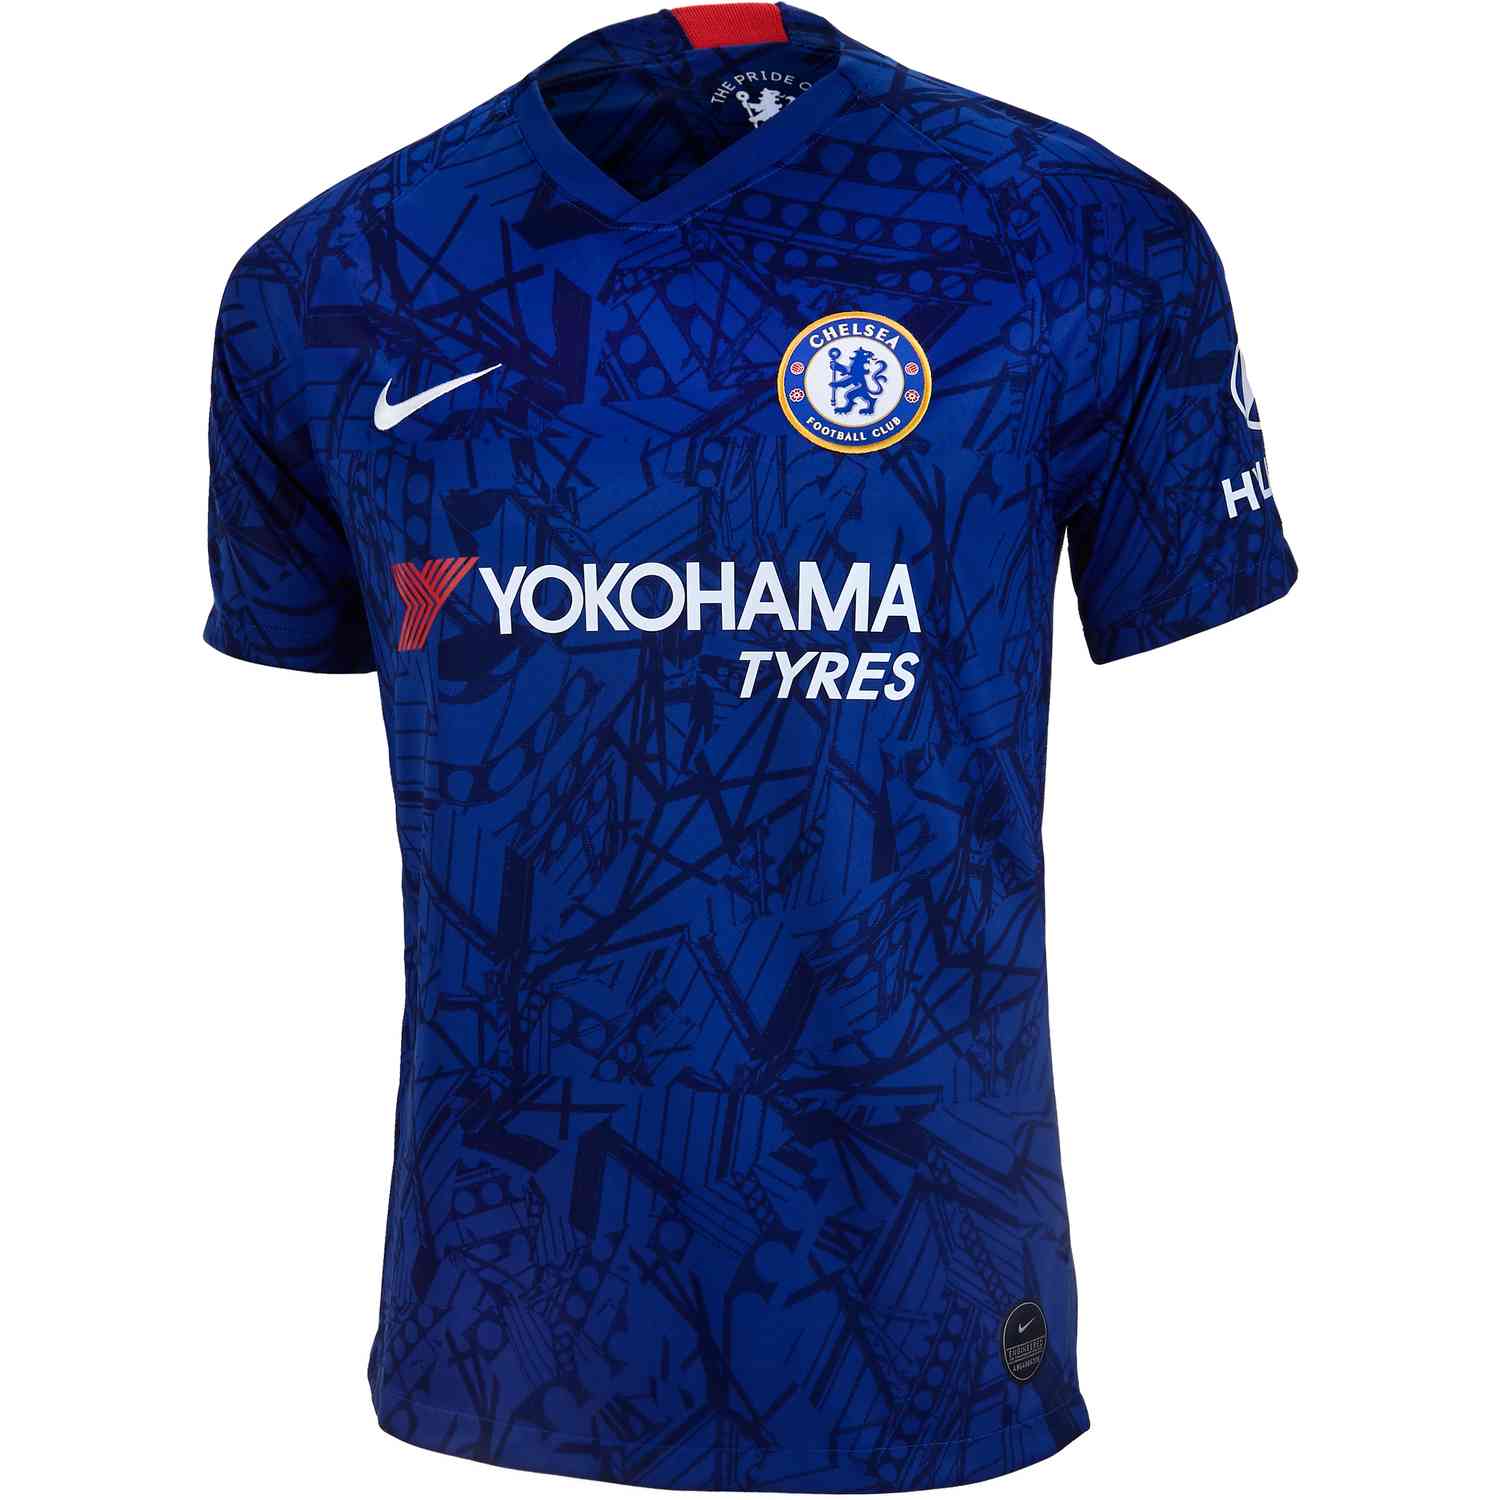 2019/20 Nike Chelsea Home Jersey 